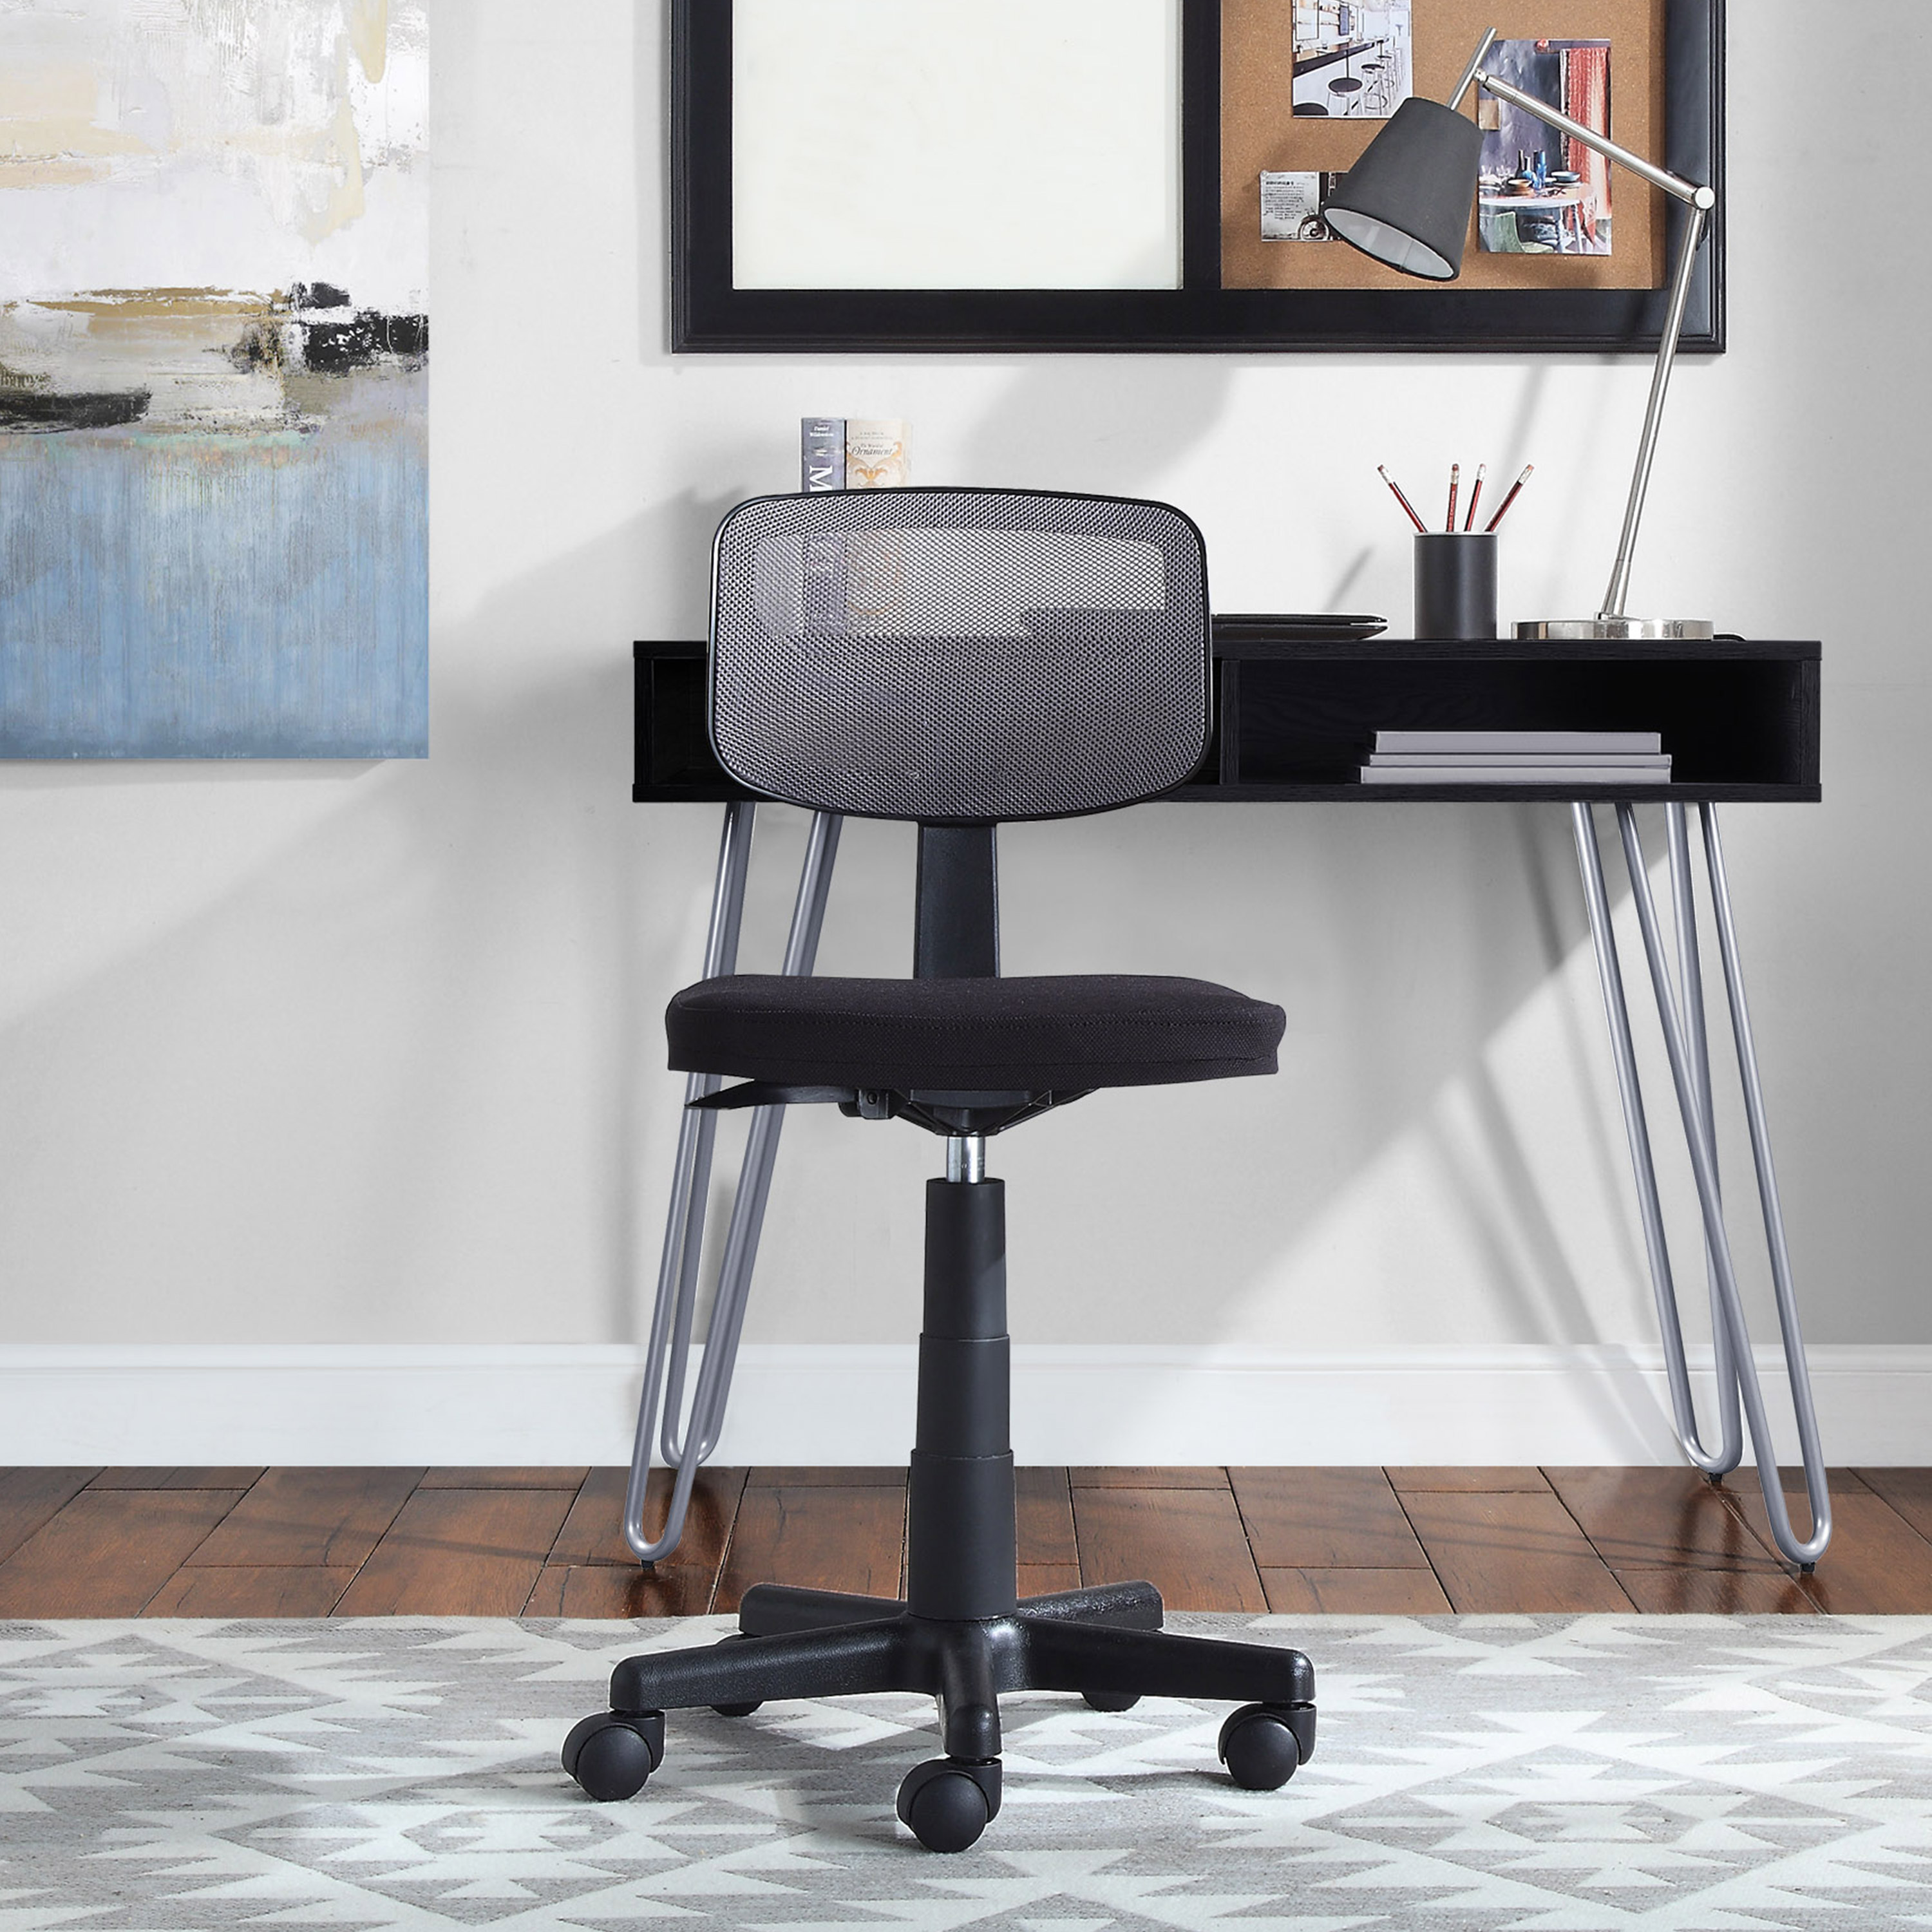 Mainstays Mesh Task Chair with Plush Padded Seat, Gray - image 5 of 9